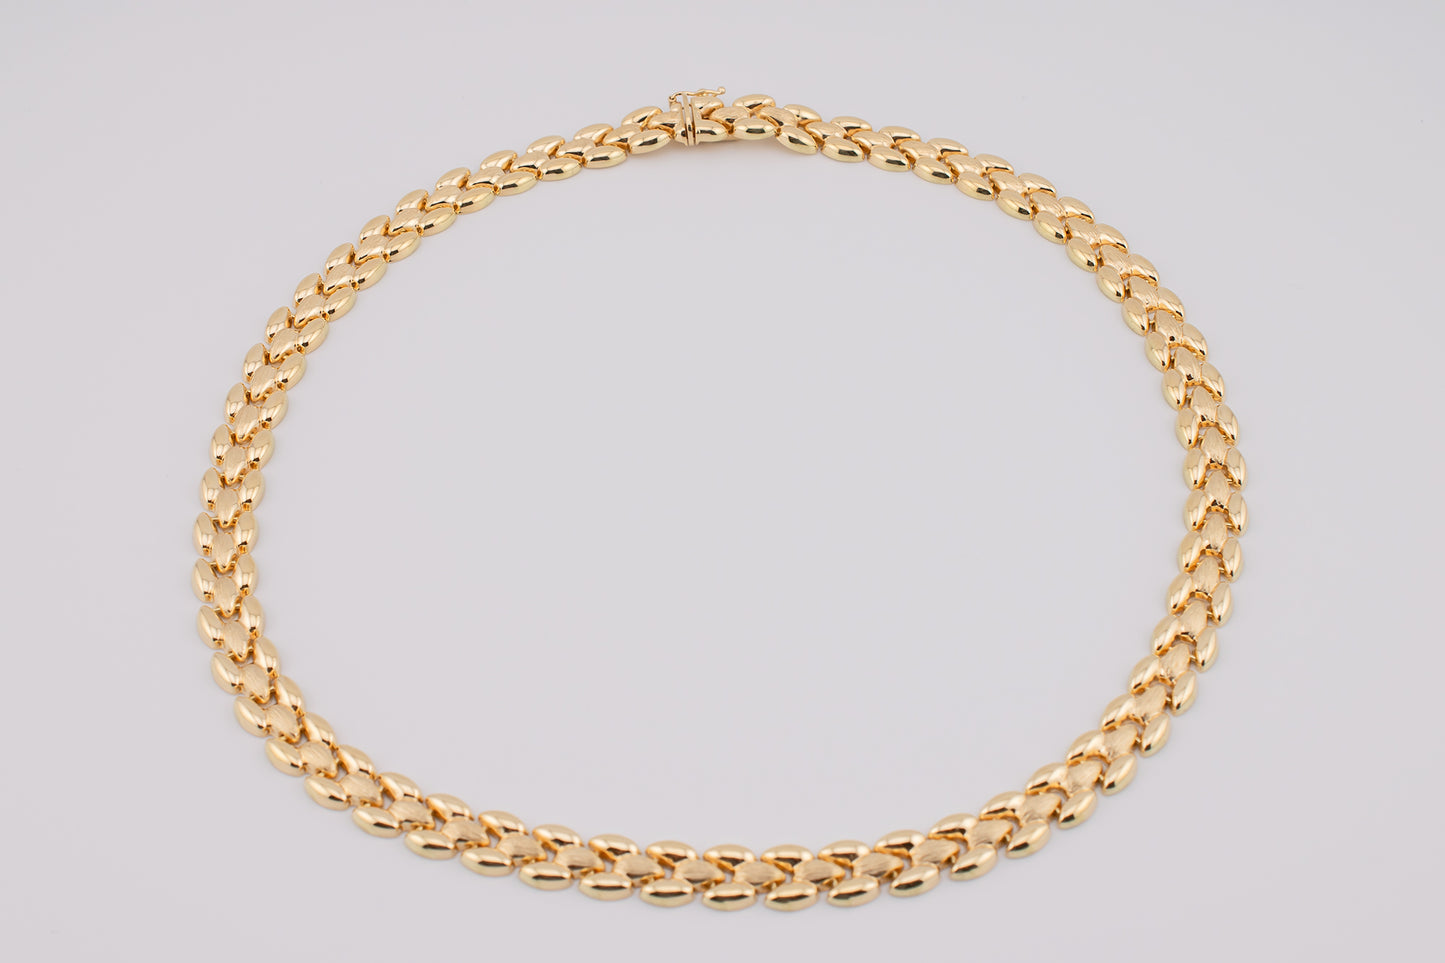 Vintage Estate 14KT Yellow Gold Italian Panther Link High Polish And Brushed Finish Necklace 18 Inches 9mm